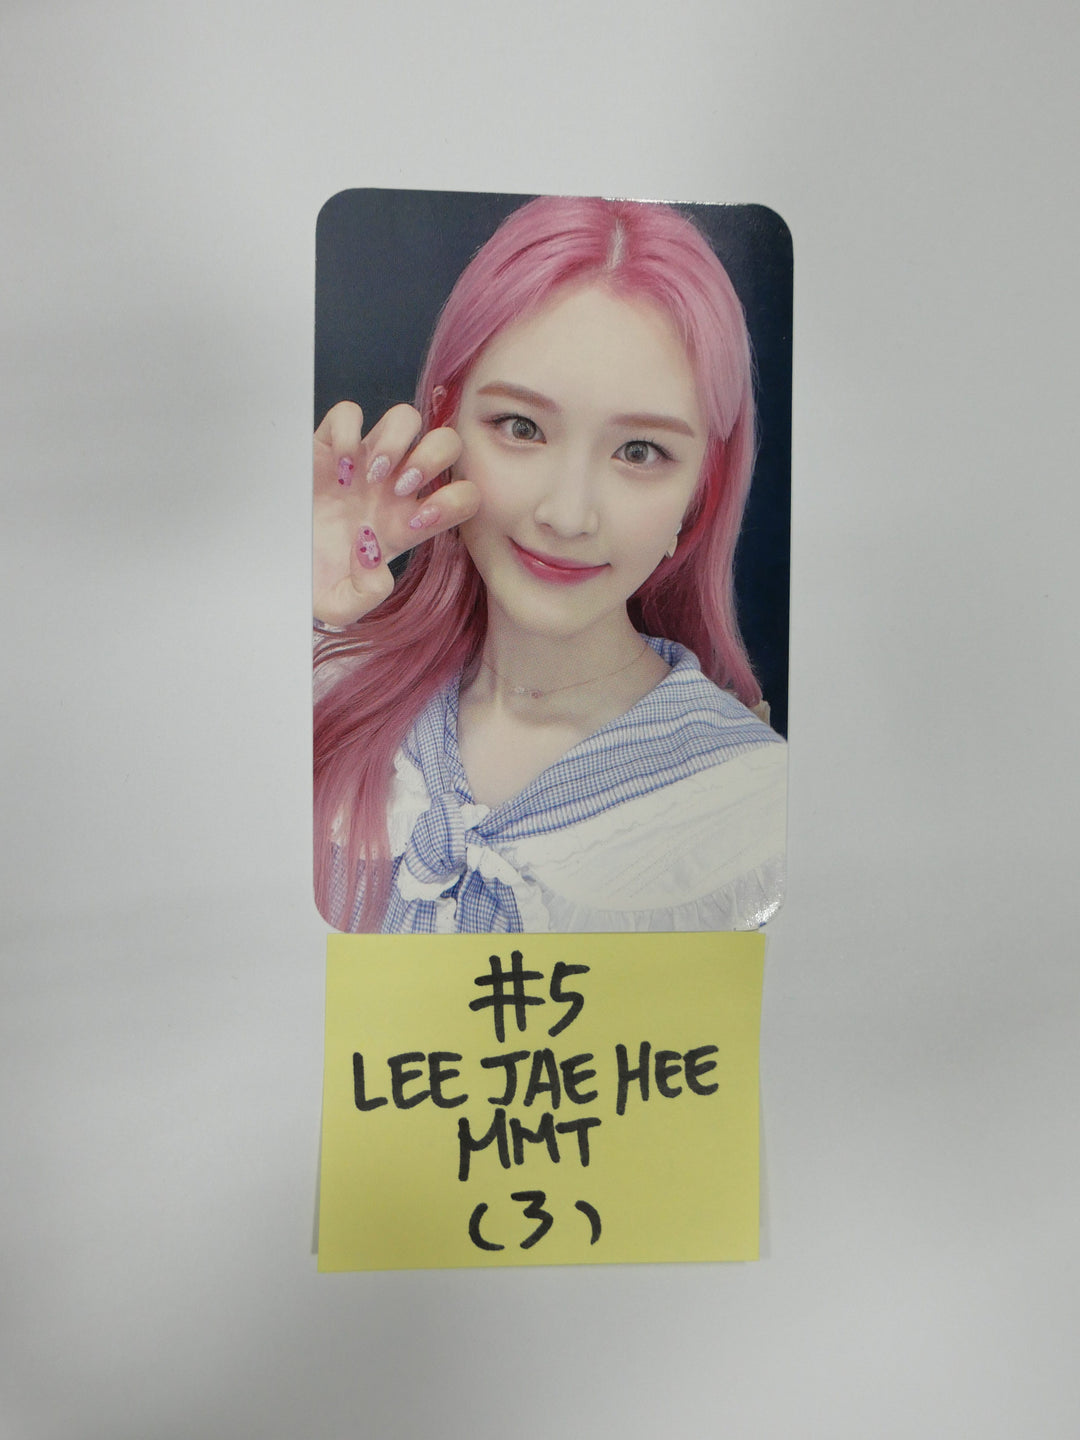 Weeekly "Holiday Party" 4th Mini- MMT event Fansign Event Photocard